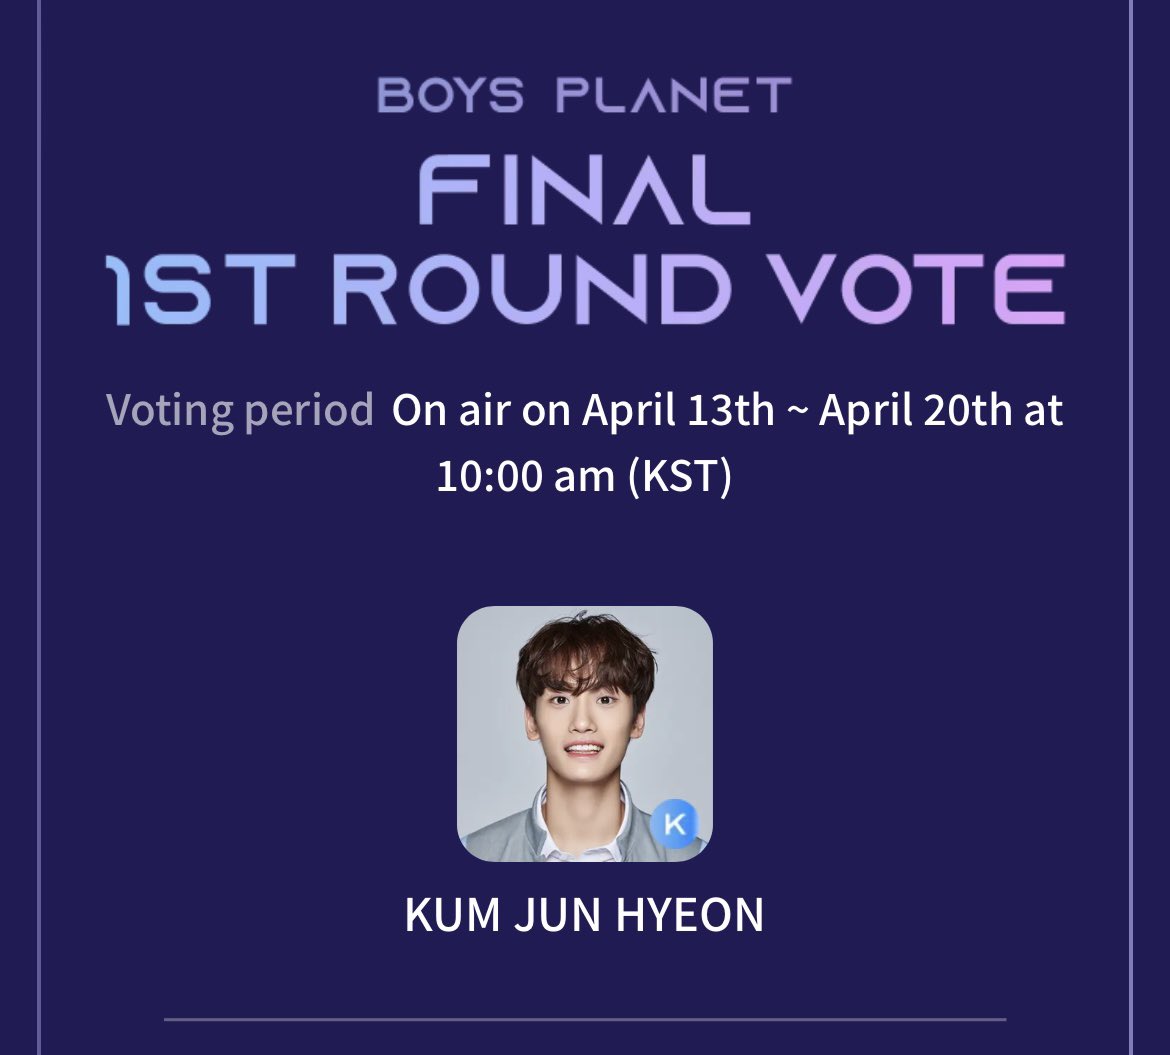 @daillymingyu @JUNHYEONGLOBAL GYULDANGIES ITS TIME TO VOTE PLEASE 🙏🏽🙏🏽